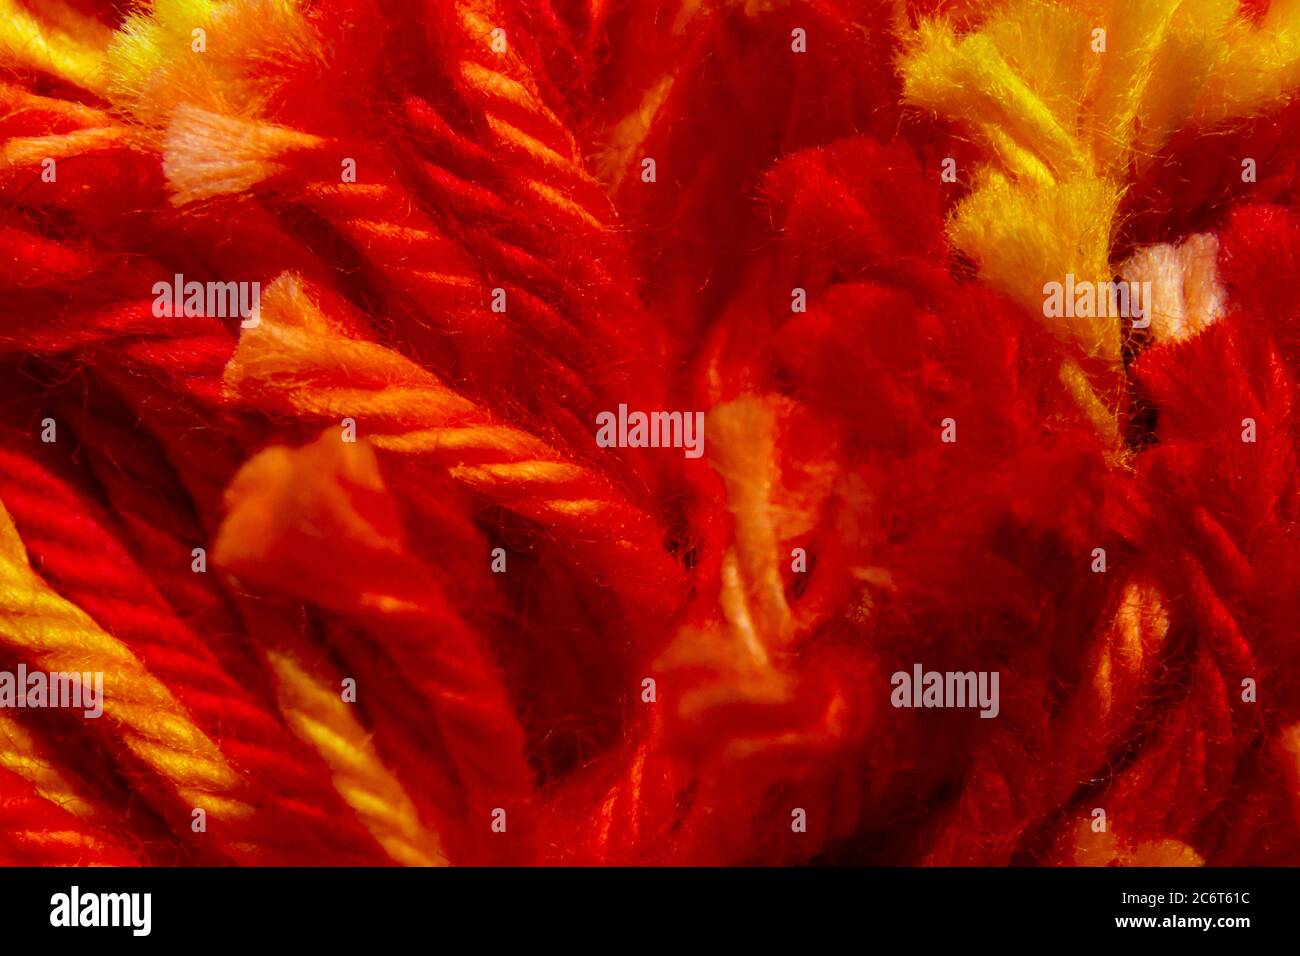 Macro photograph of red and yellow wool Stock Photo